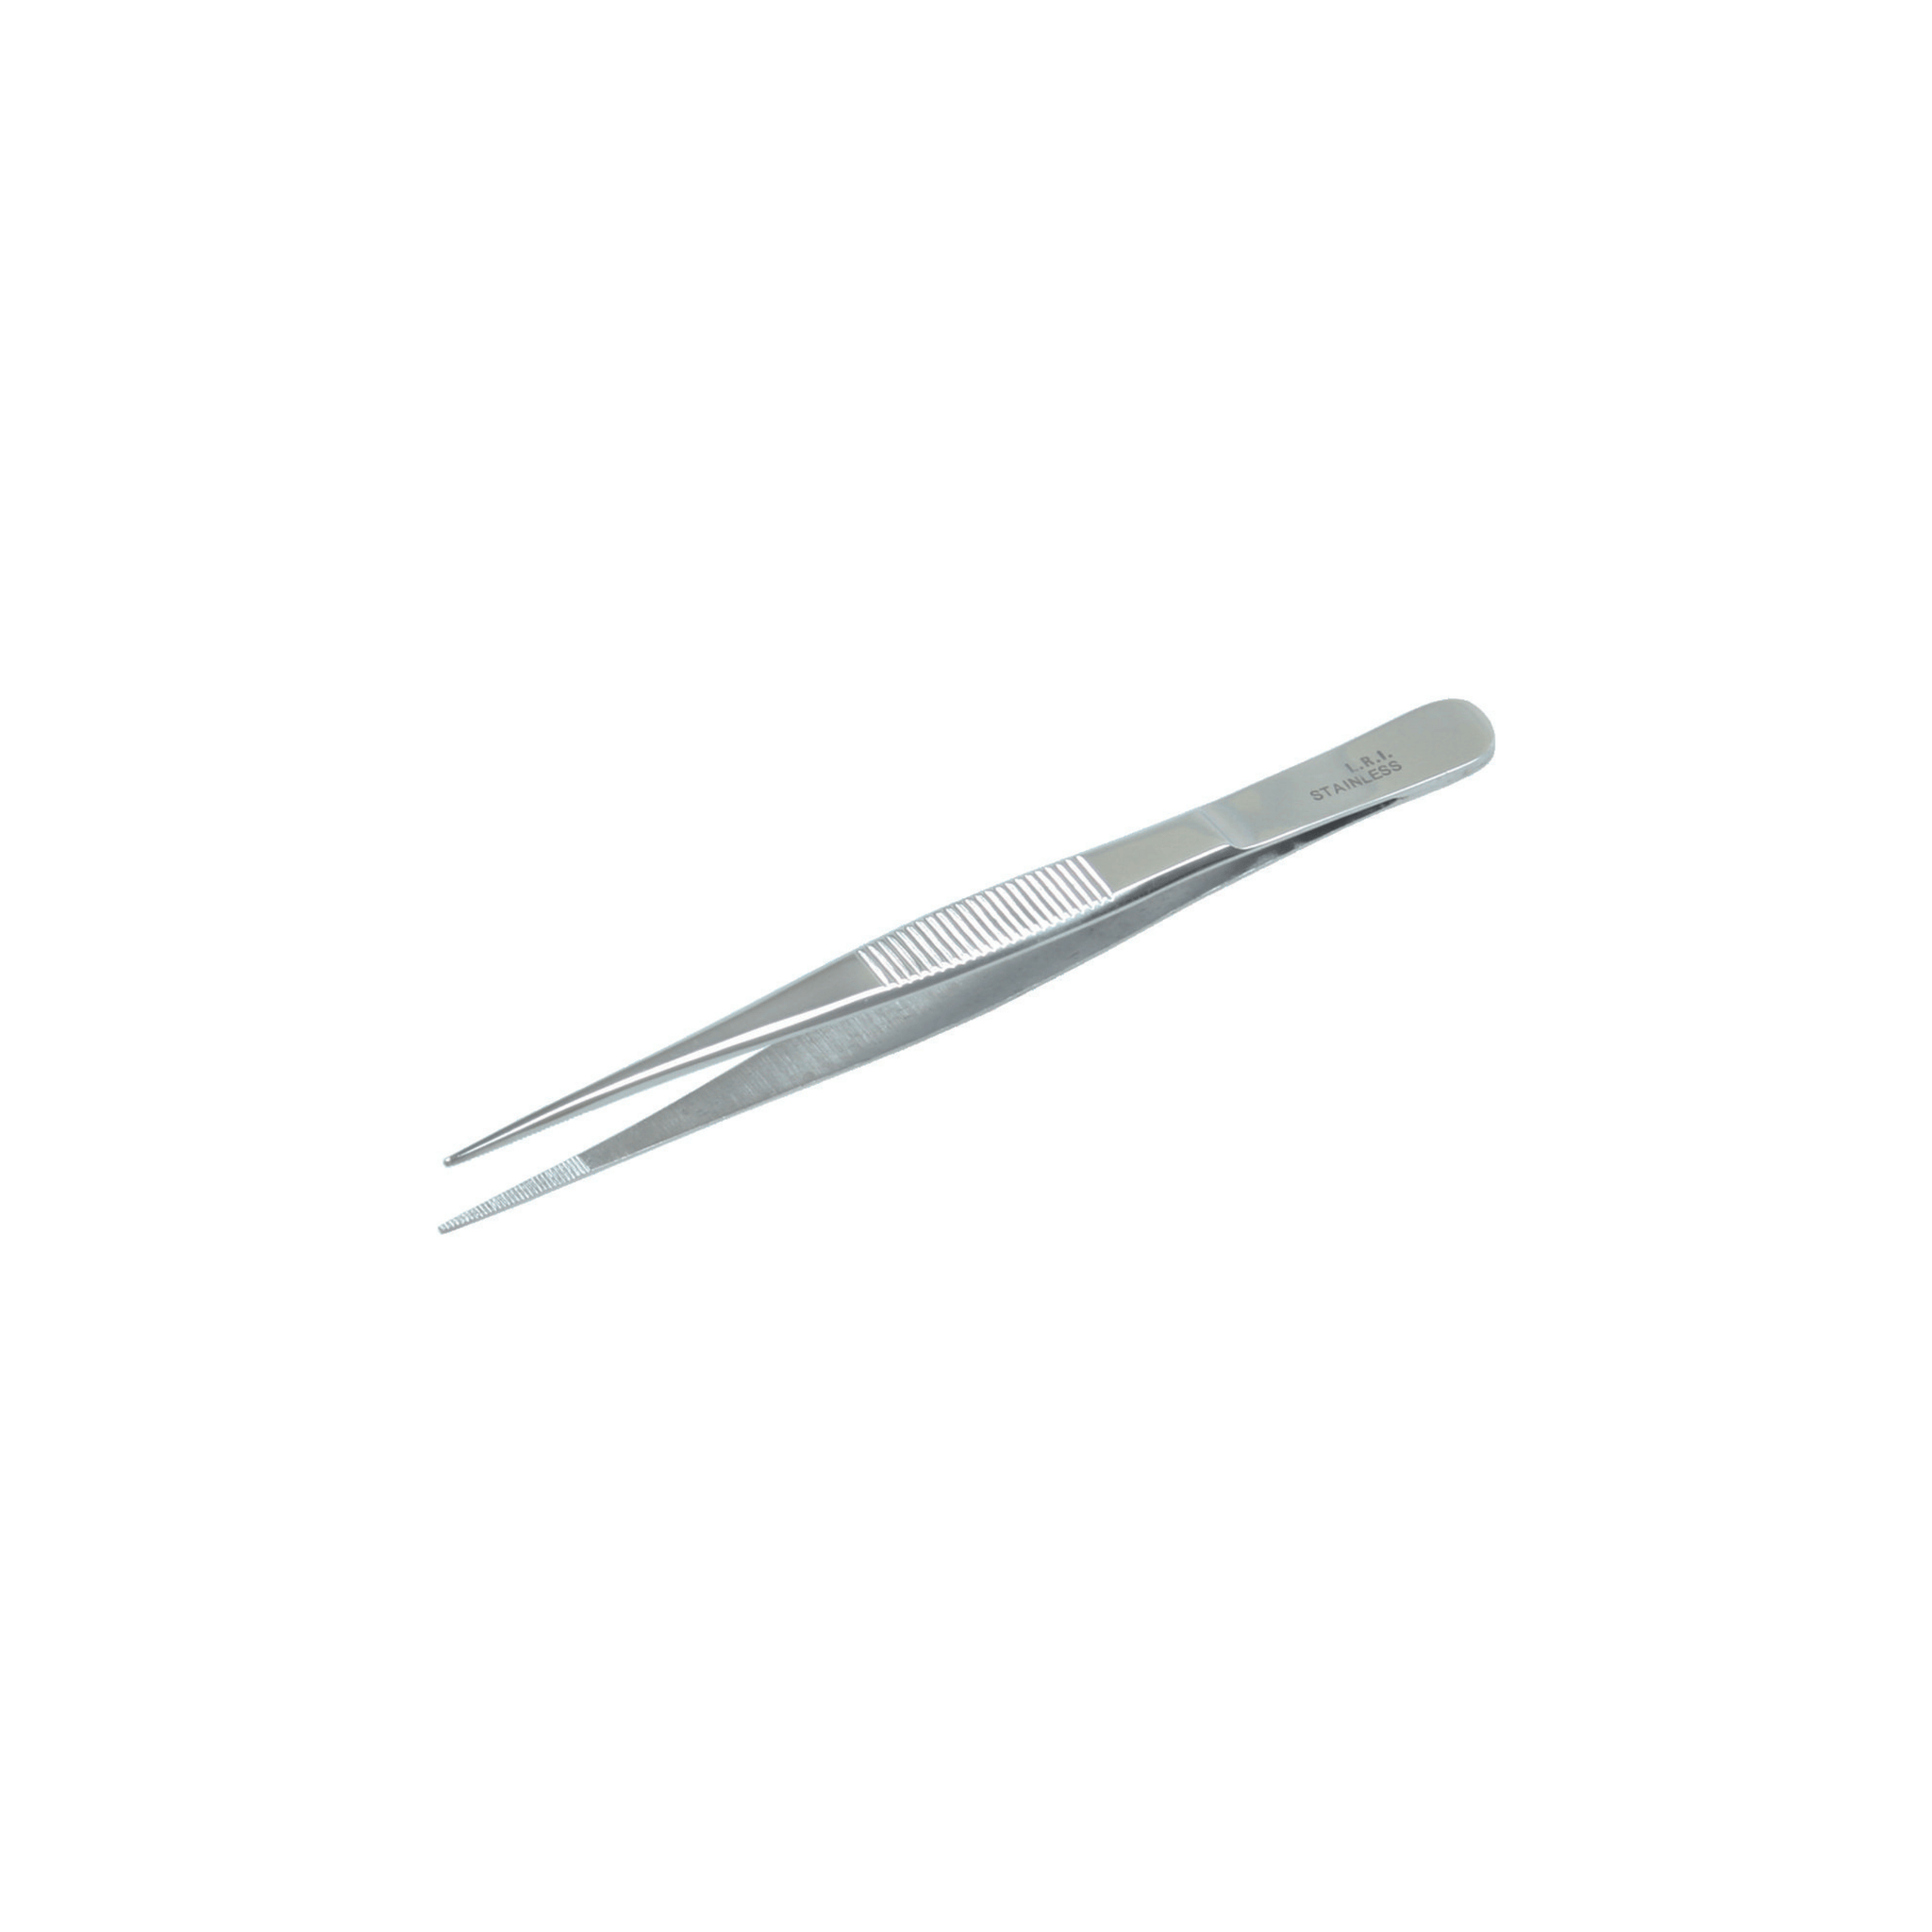 Dressing Forceps- Pointed, 12.5 cm